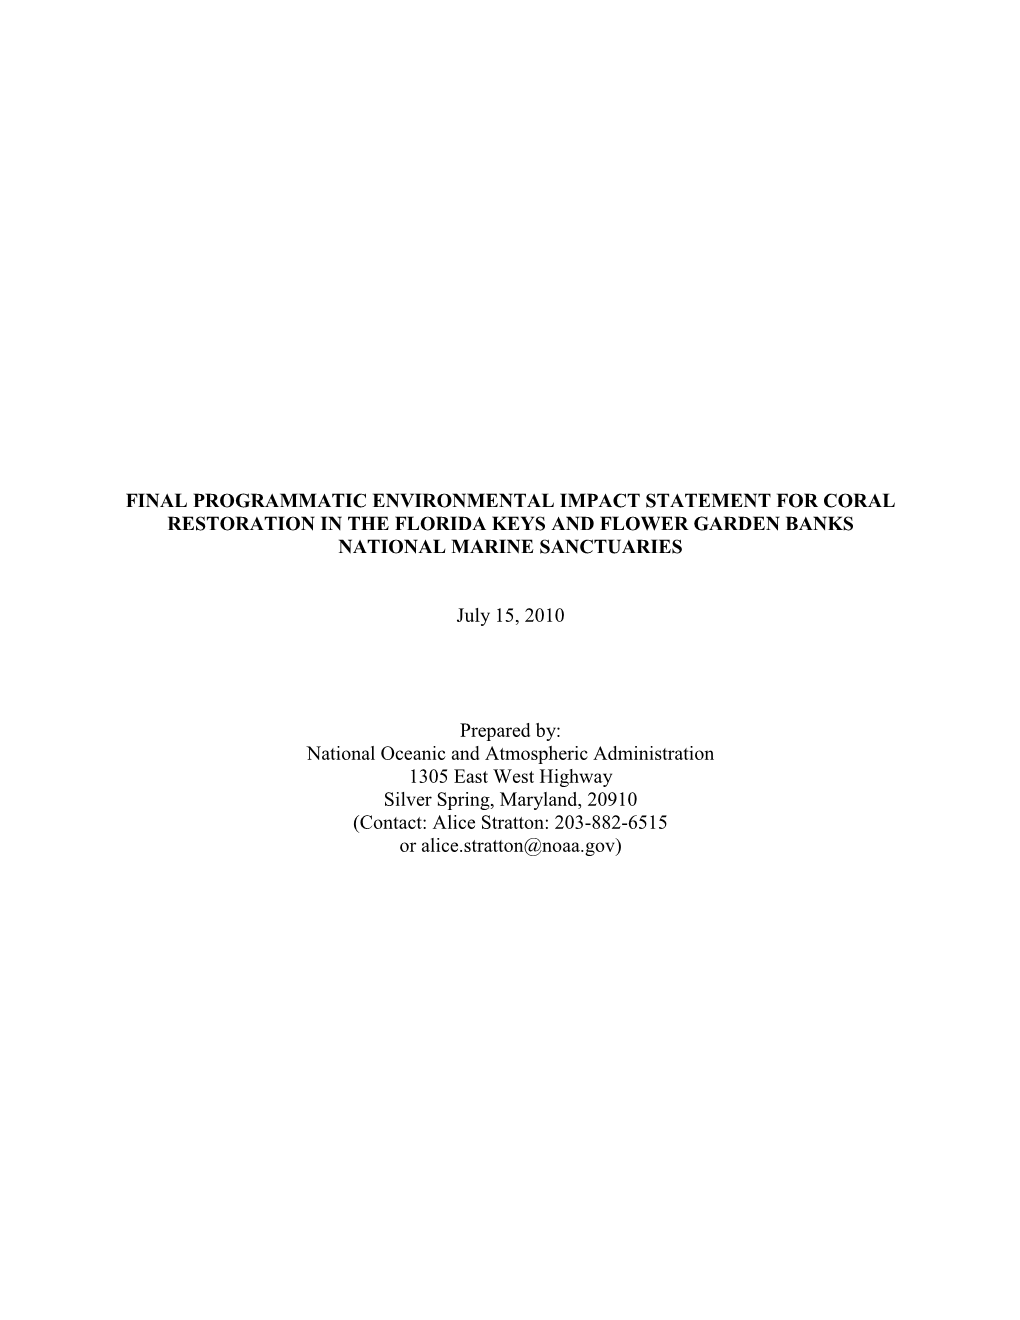 Final Programmatic Environmental Impact Statement for Coral Restoration in the Florida Keys and Flower Garden Banks National Marine Sanctuaries